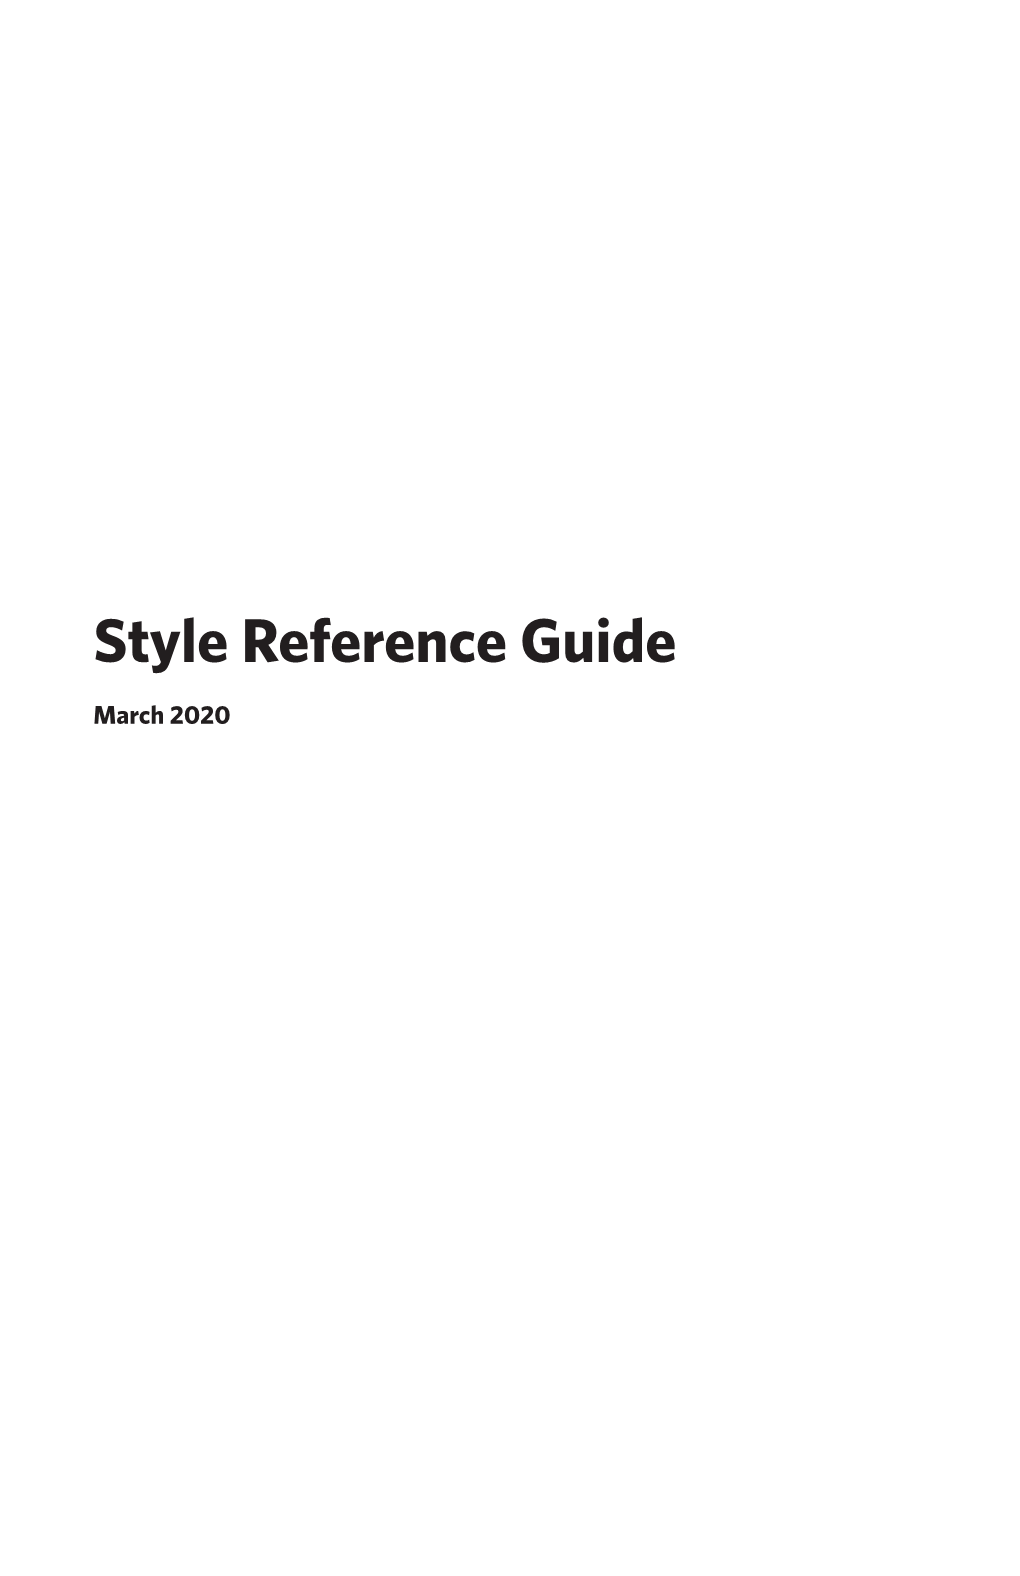 Samford Style Reference Guide